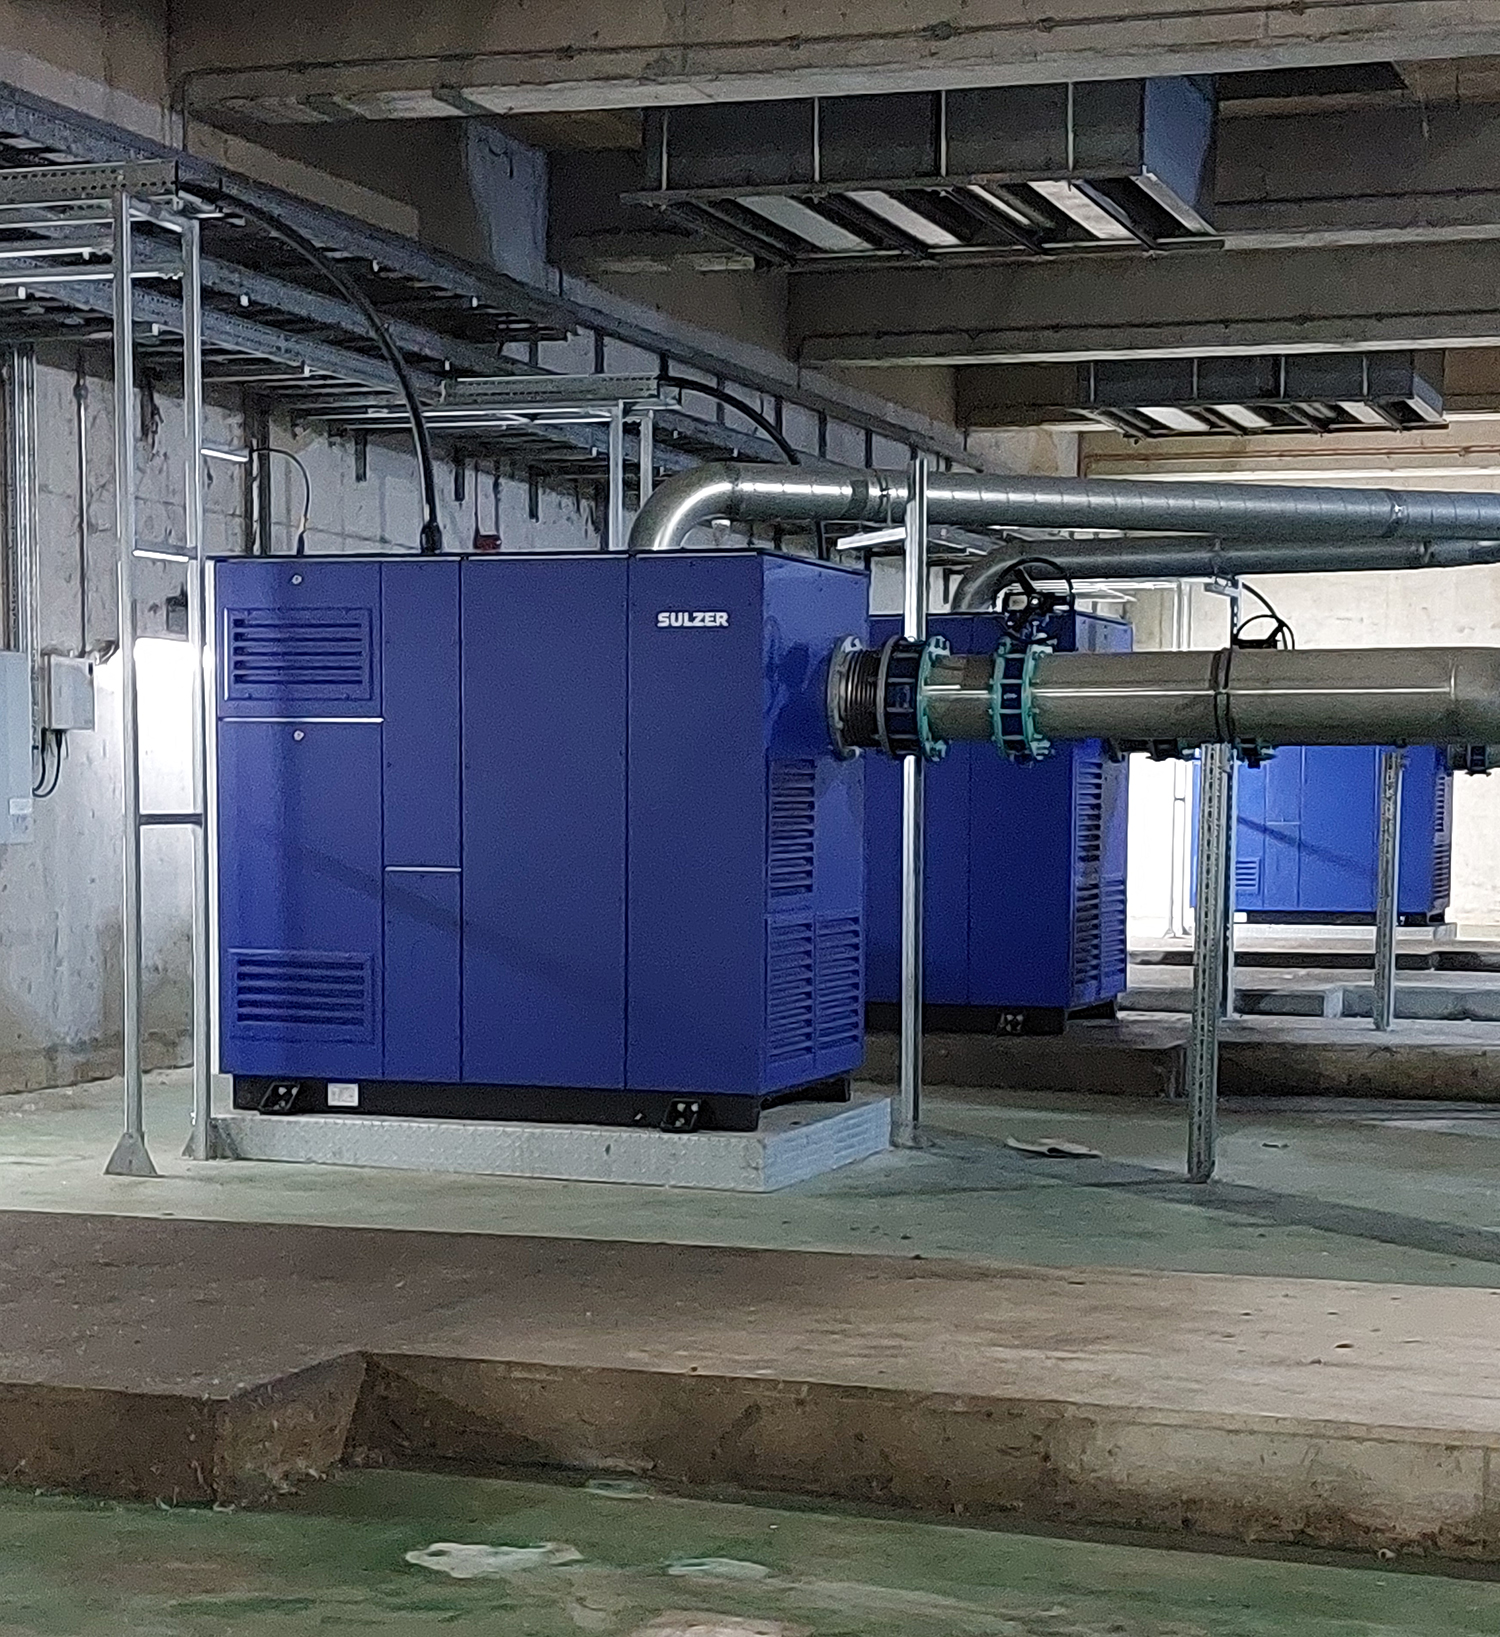 Six HST 20 turbocompressors from Sulzer were chosen to replace eight units at Derby Sewage Treatment Works to reduce the risk of downtime.